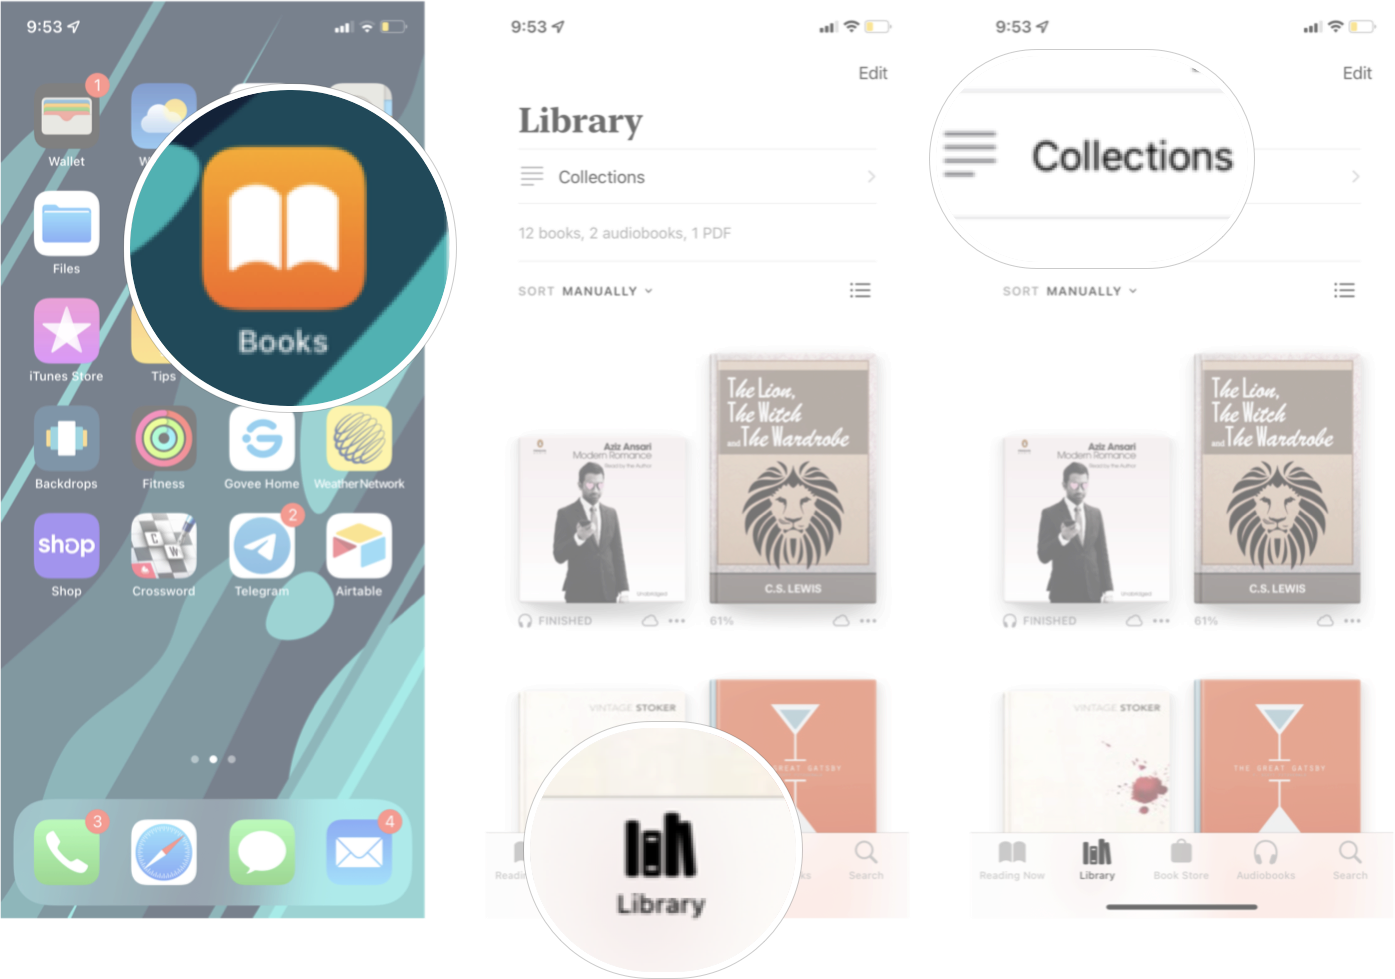 Delete Collections In Books In iOS 15: Launch the Books app, tap Library, and then tap collections.